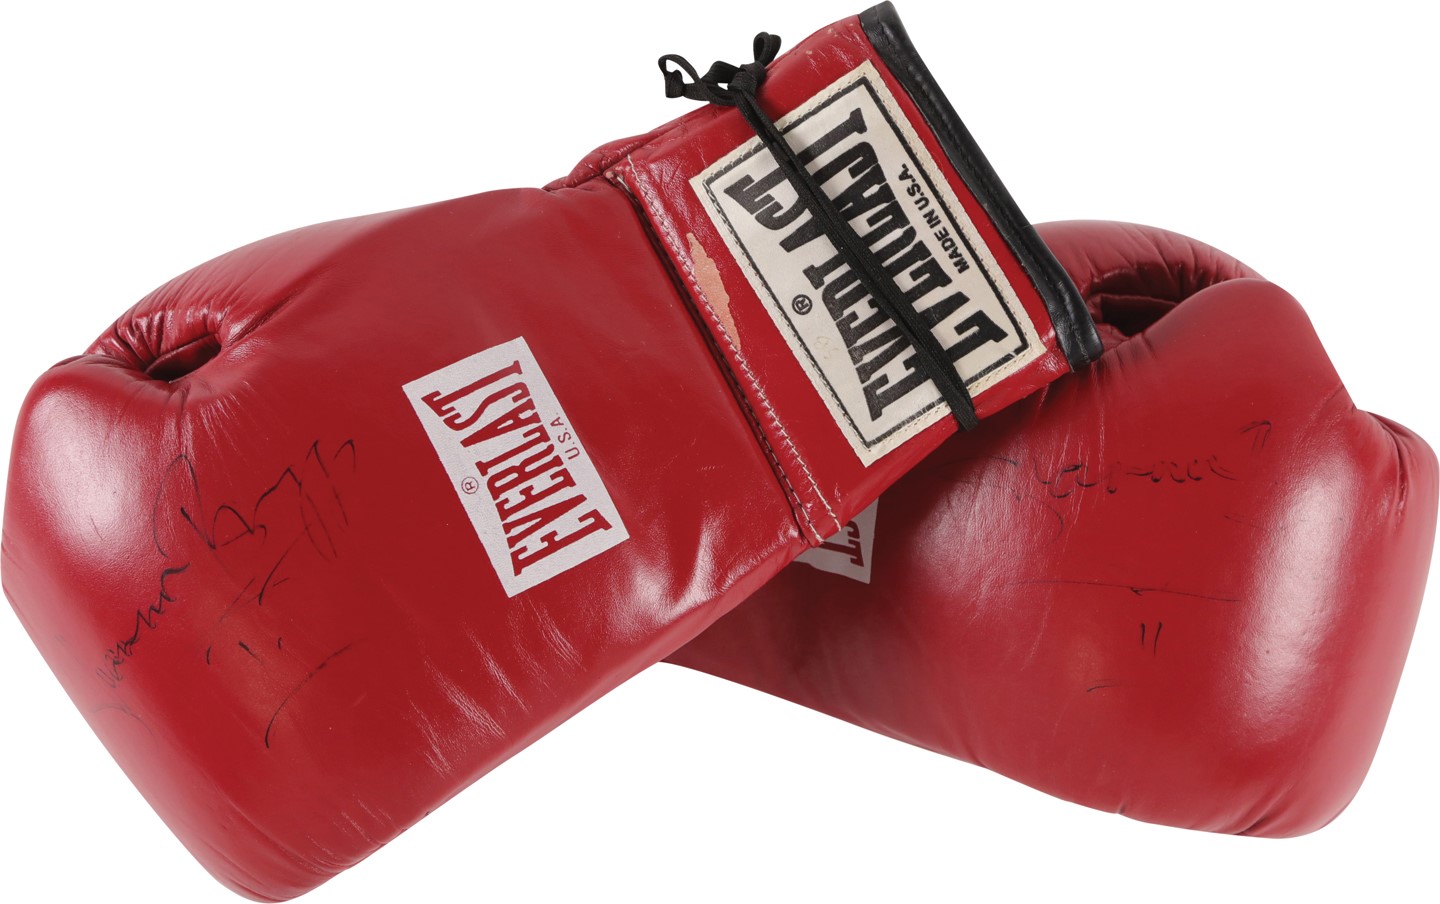 Muhammad Ali & Boxing - 3/6/04 Shannon Briggs Signed Fight Worn Boxing Gloves vs. Jeff Peagues (Promoter LOA)